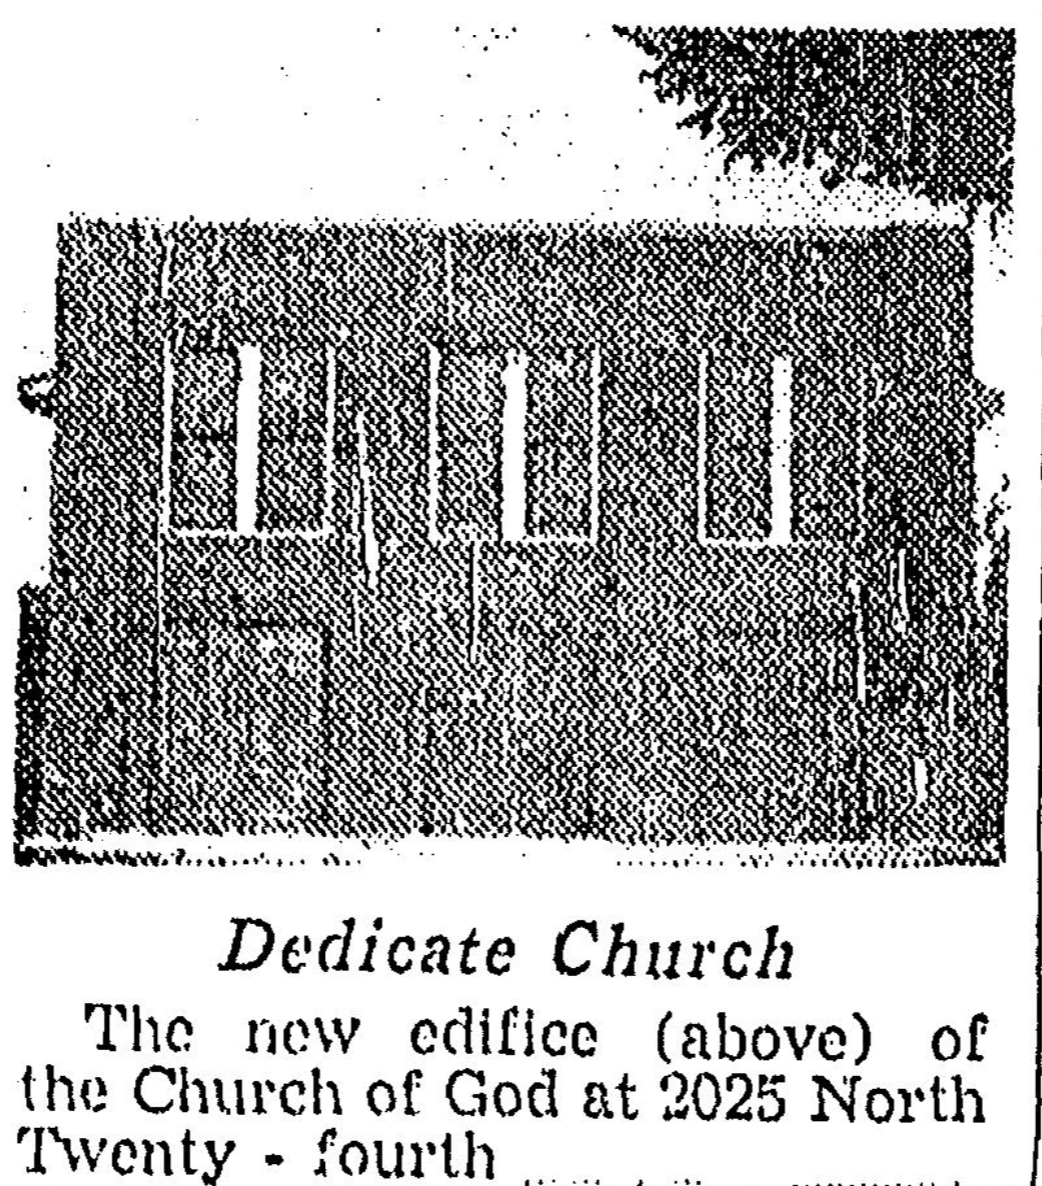 This was the original North 24th Street Church of God at 2025 N. 24th St., as pictured in the Omaha World-Herald at its dedication on July 28, 1945.